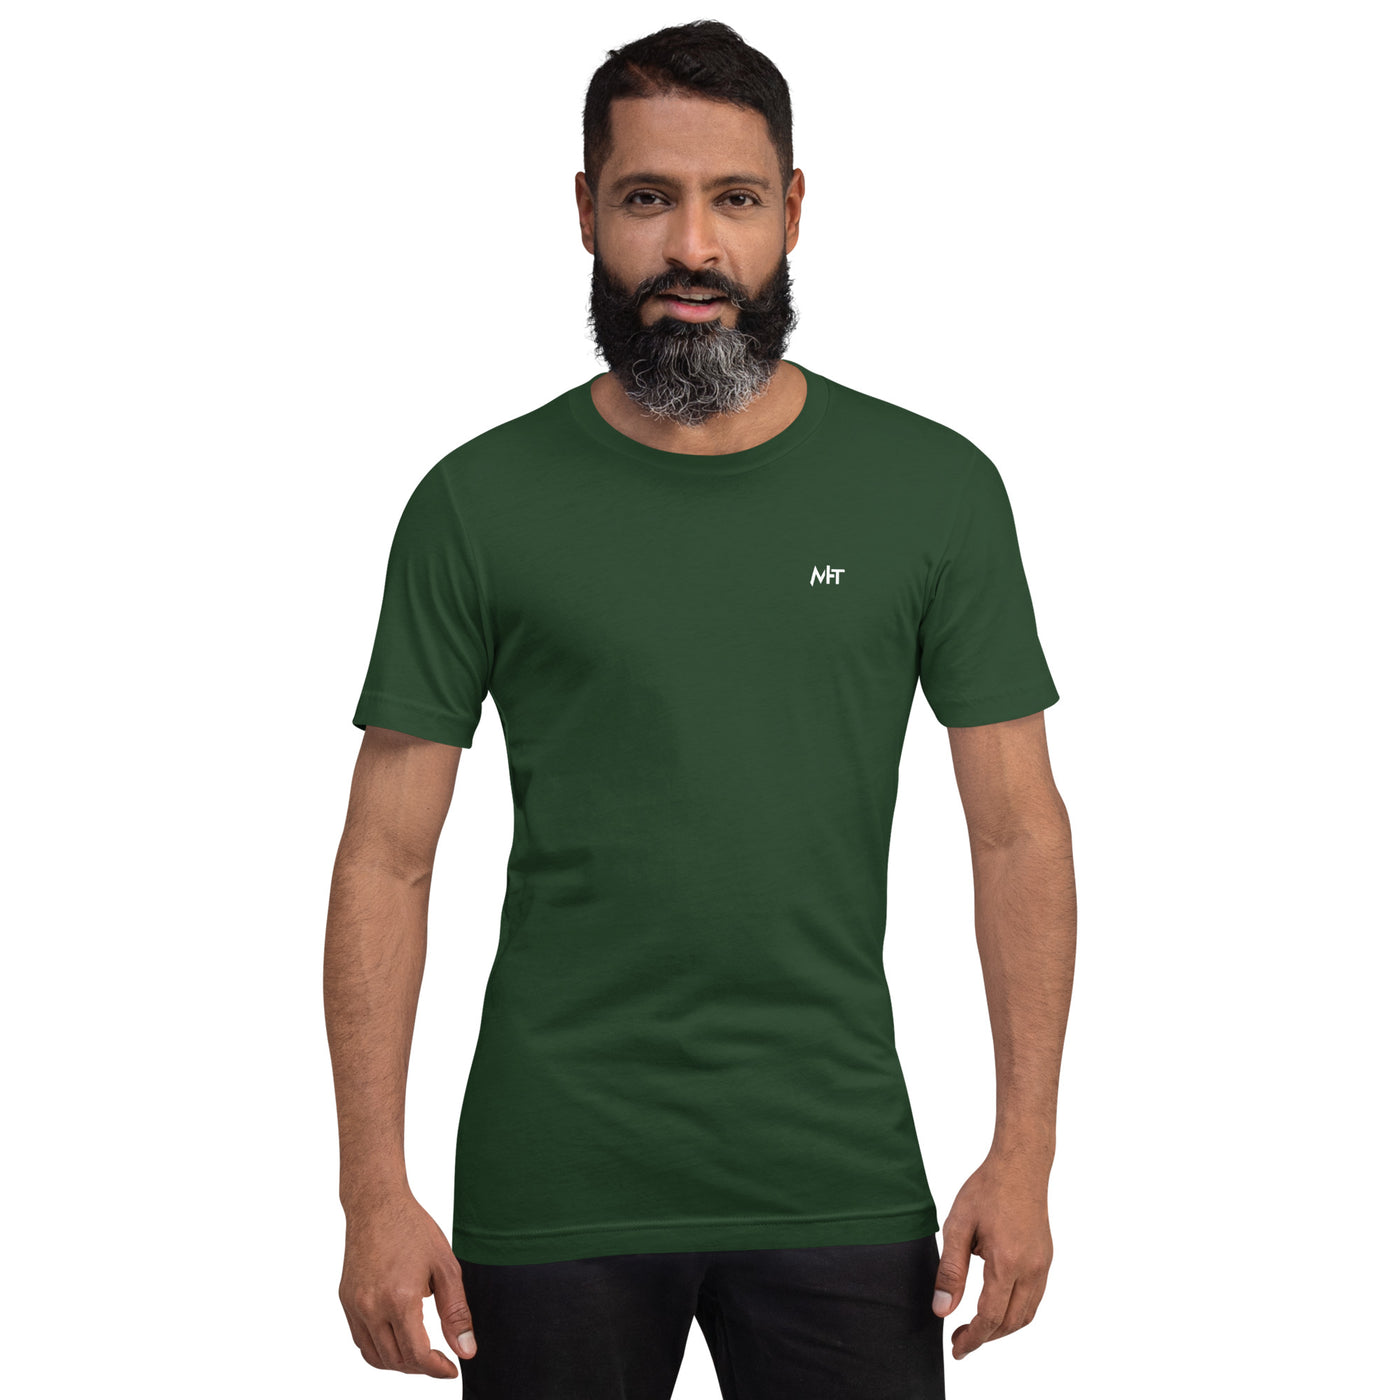 This is my Human Costume, I am a really a Crypto - Unisex t-shirt